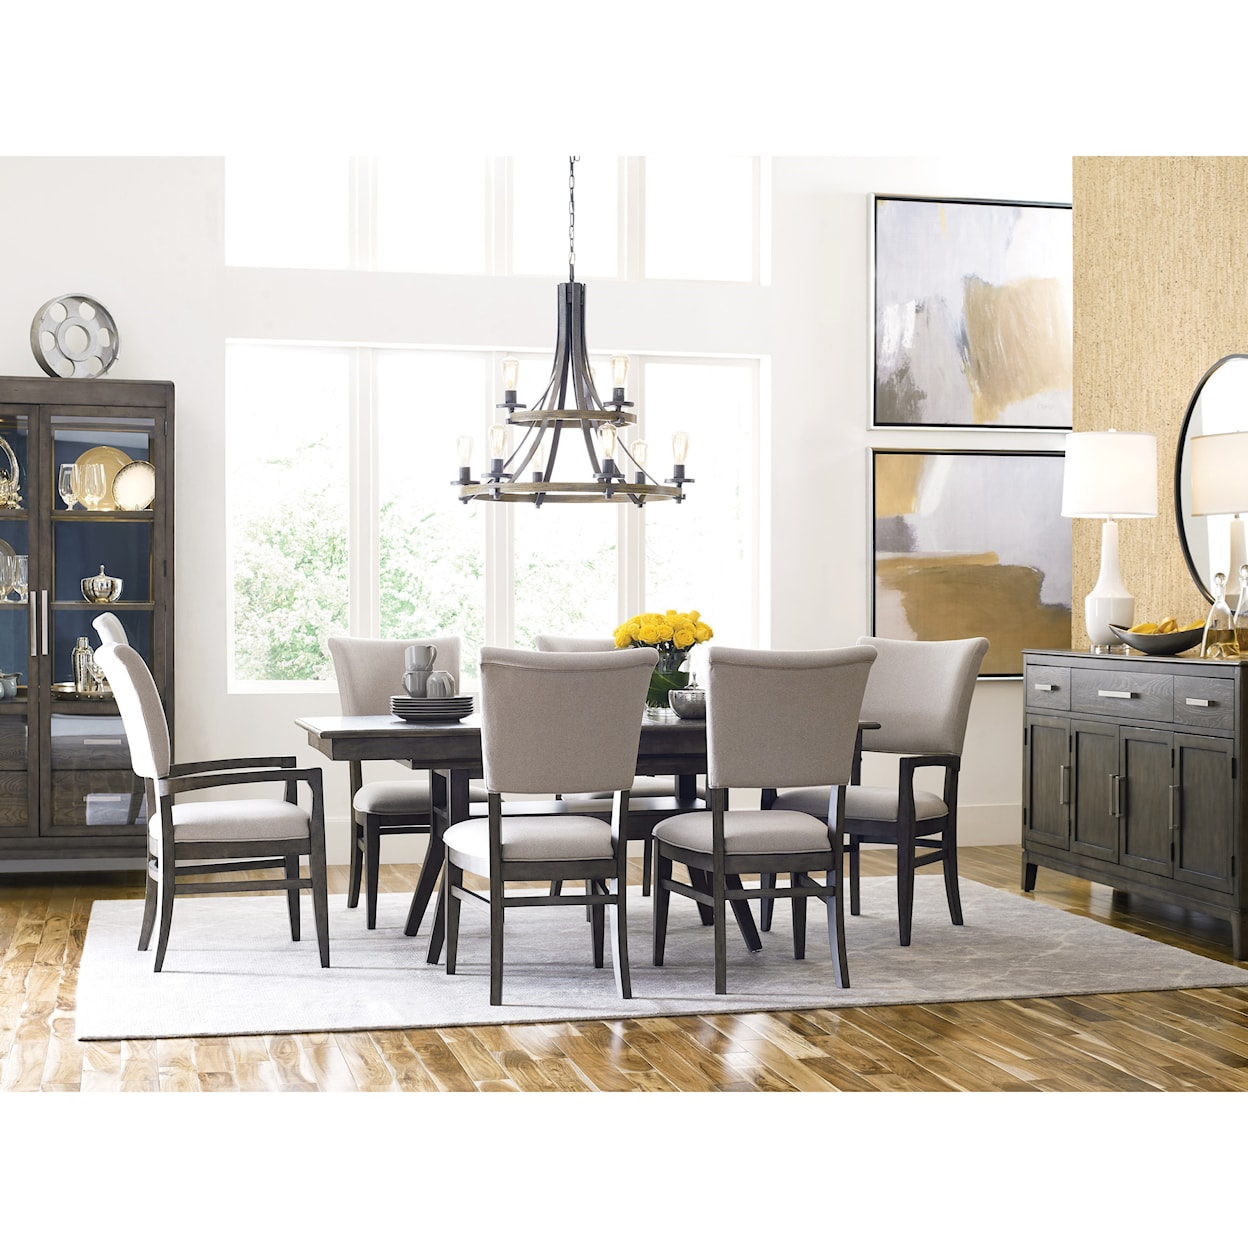 Kincaid Furniture Cascade Dining Table Set with 6 Chairs